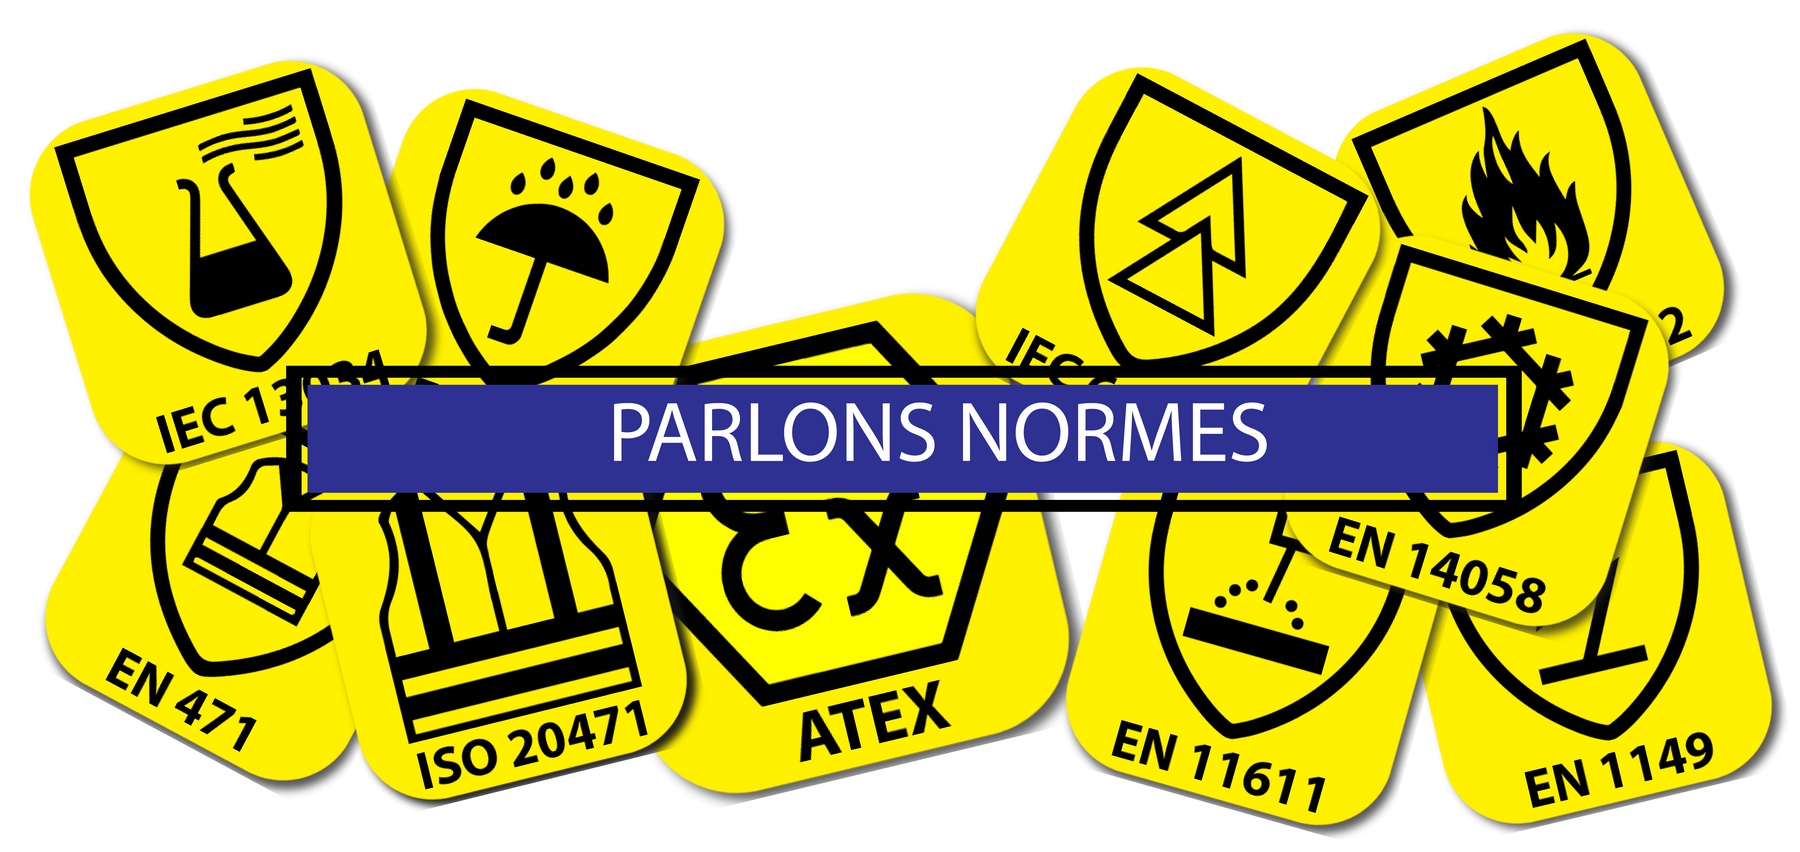 PARLONS NORMES